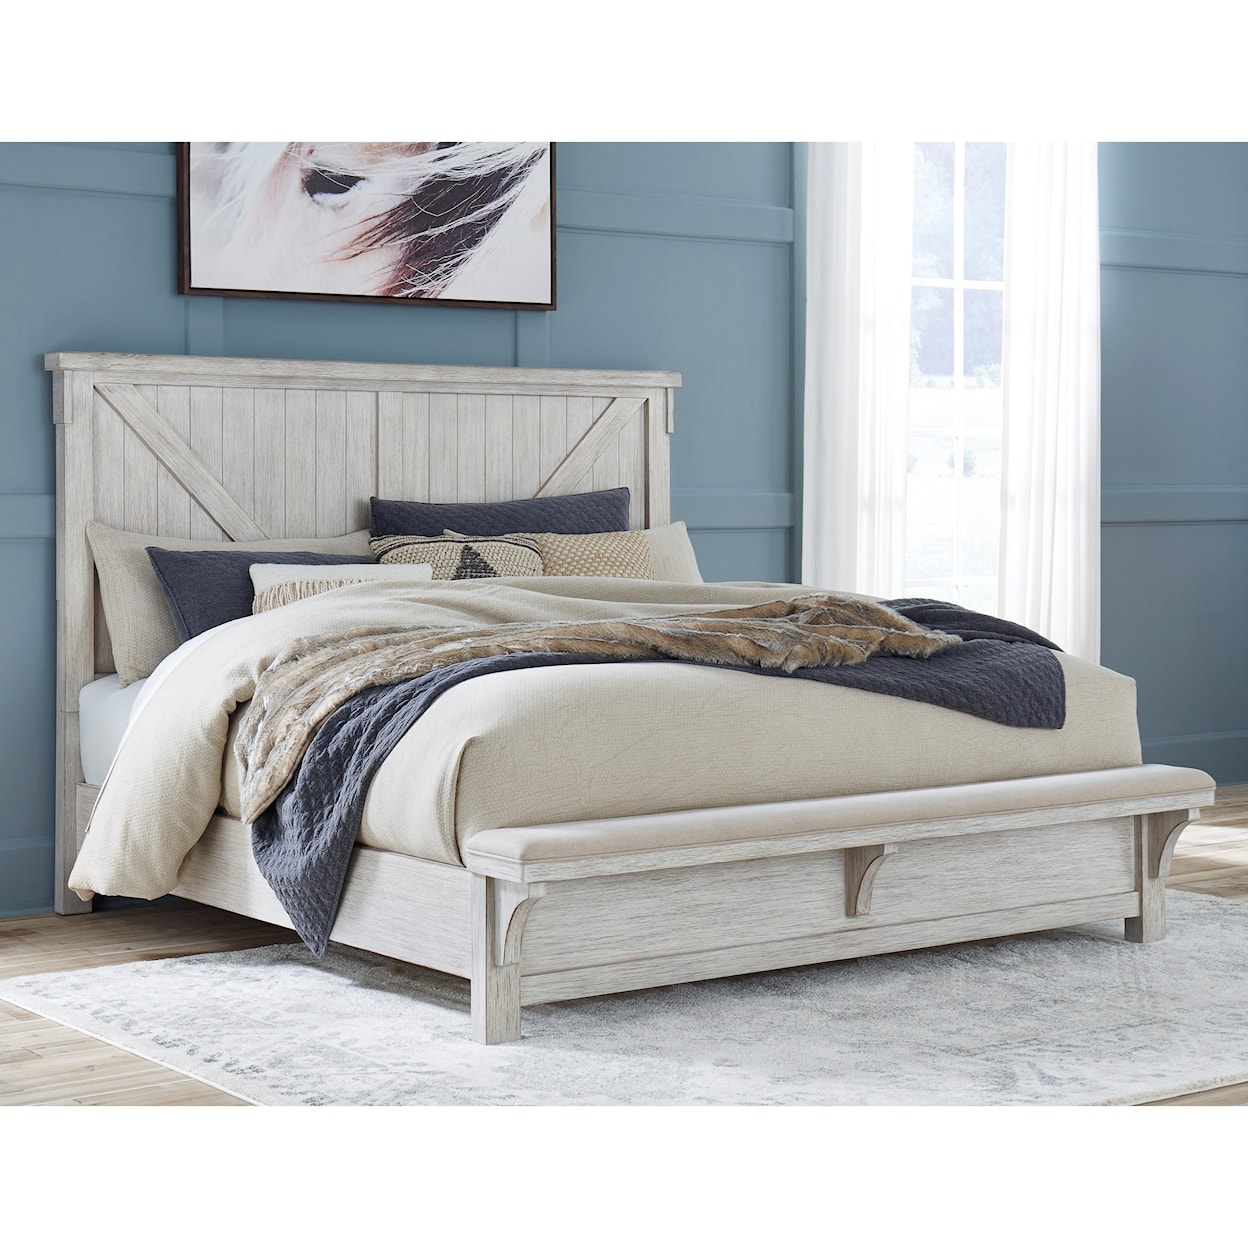 Signature Design Brashland Calfornia King Bed with Footboard Bench